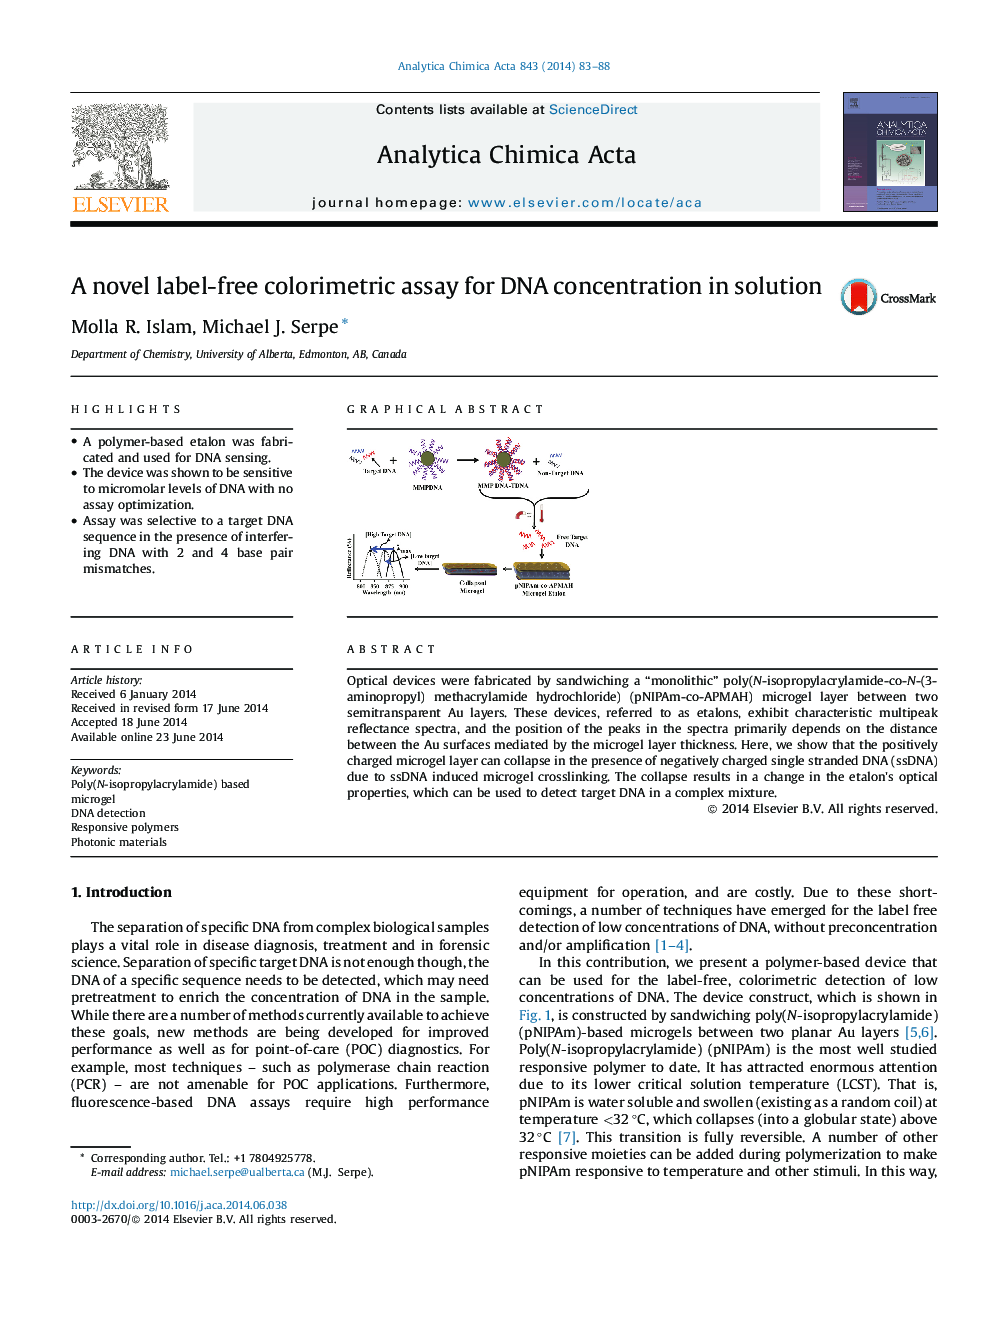 A novel label-free colorimetric assay for DNA concentration in solution